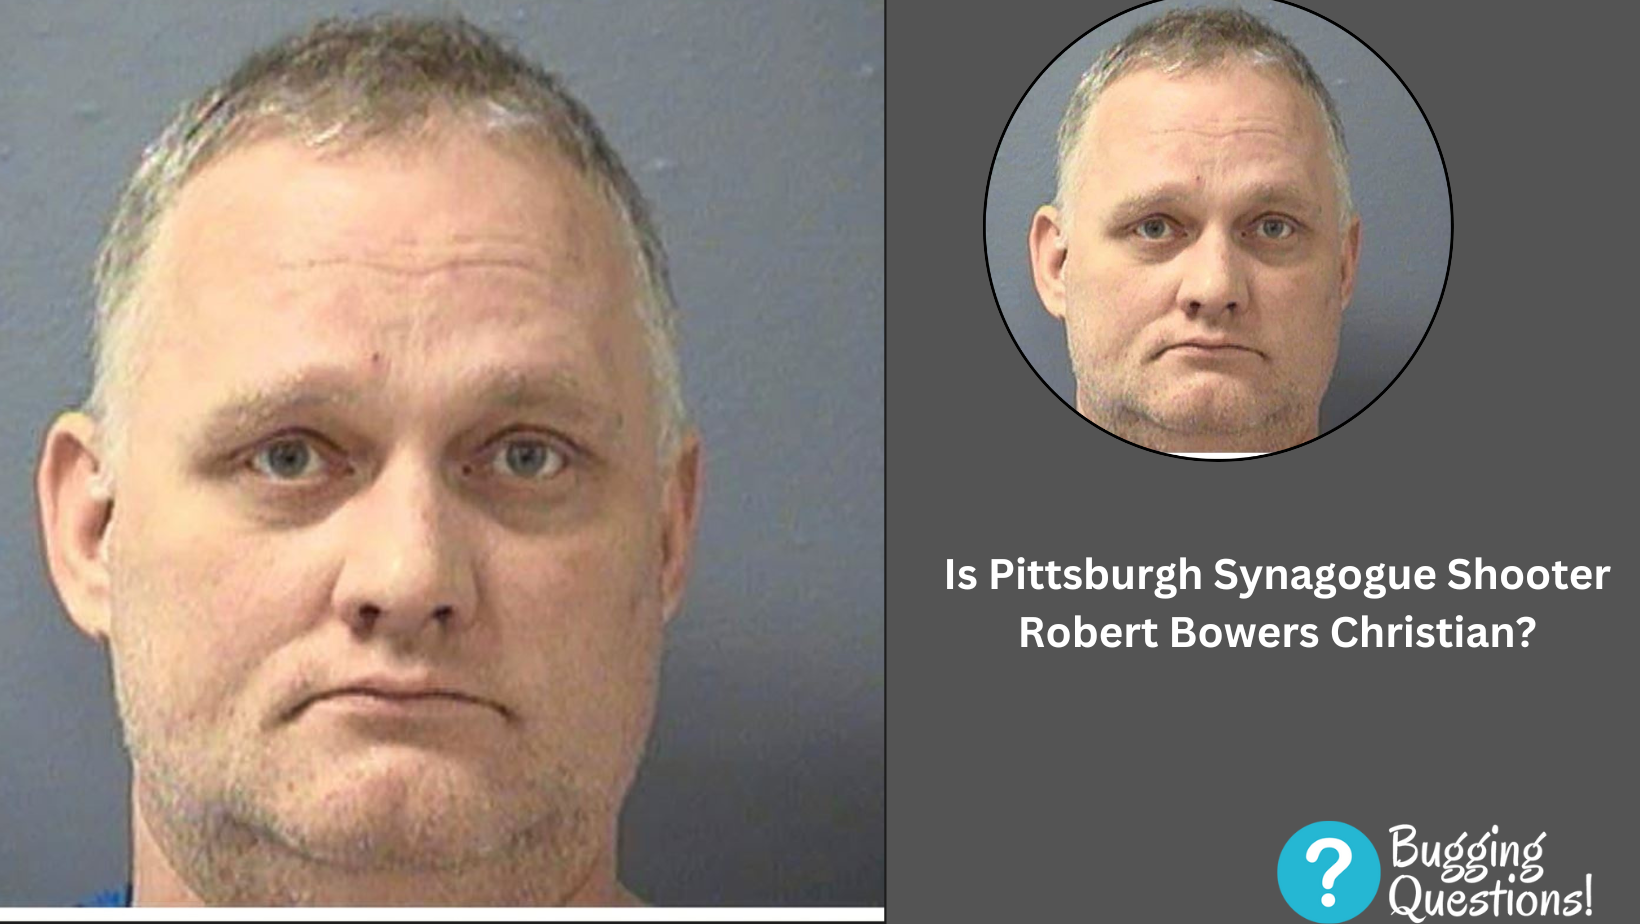 Is Pittsburgh Synagogue Shooter Robert Bowers Christian?